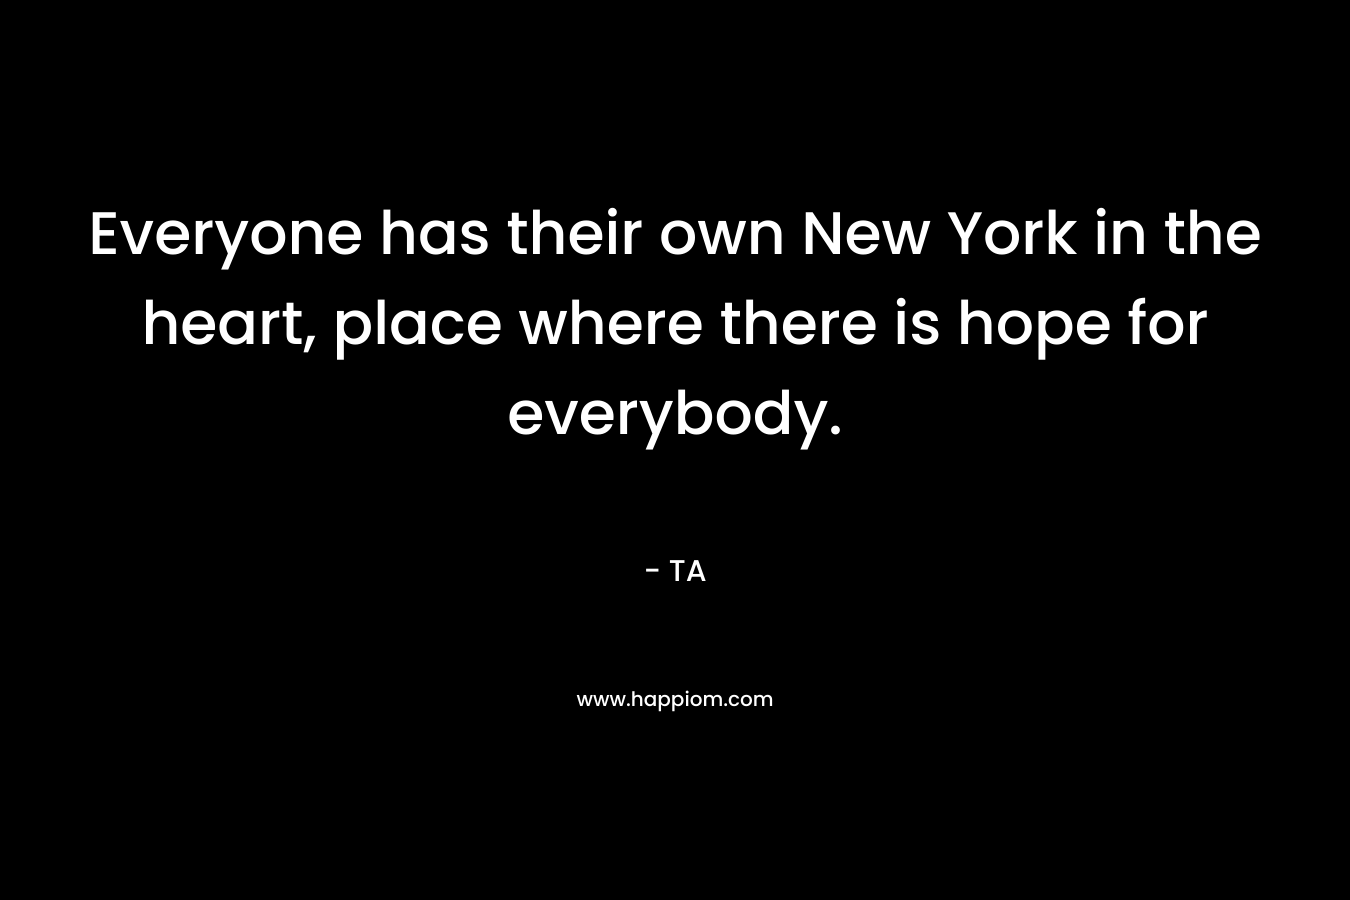 Everyone has their own New York in the heart, place where there is hope for everybody.